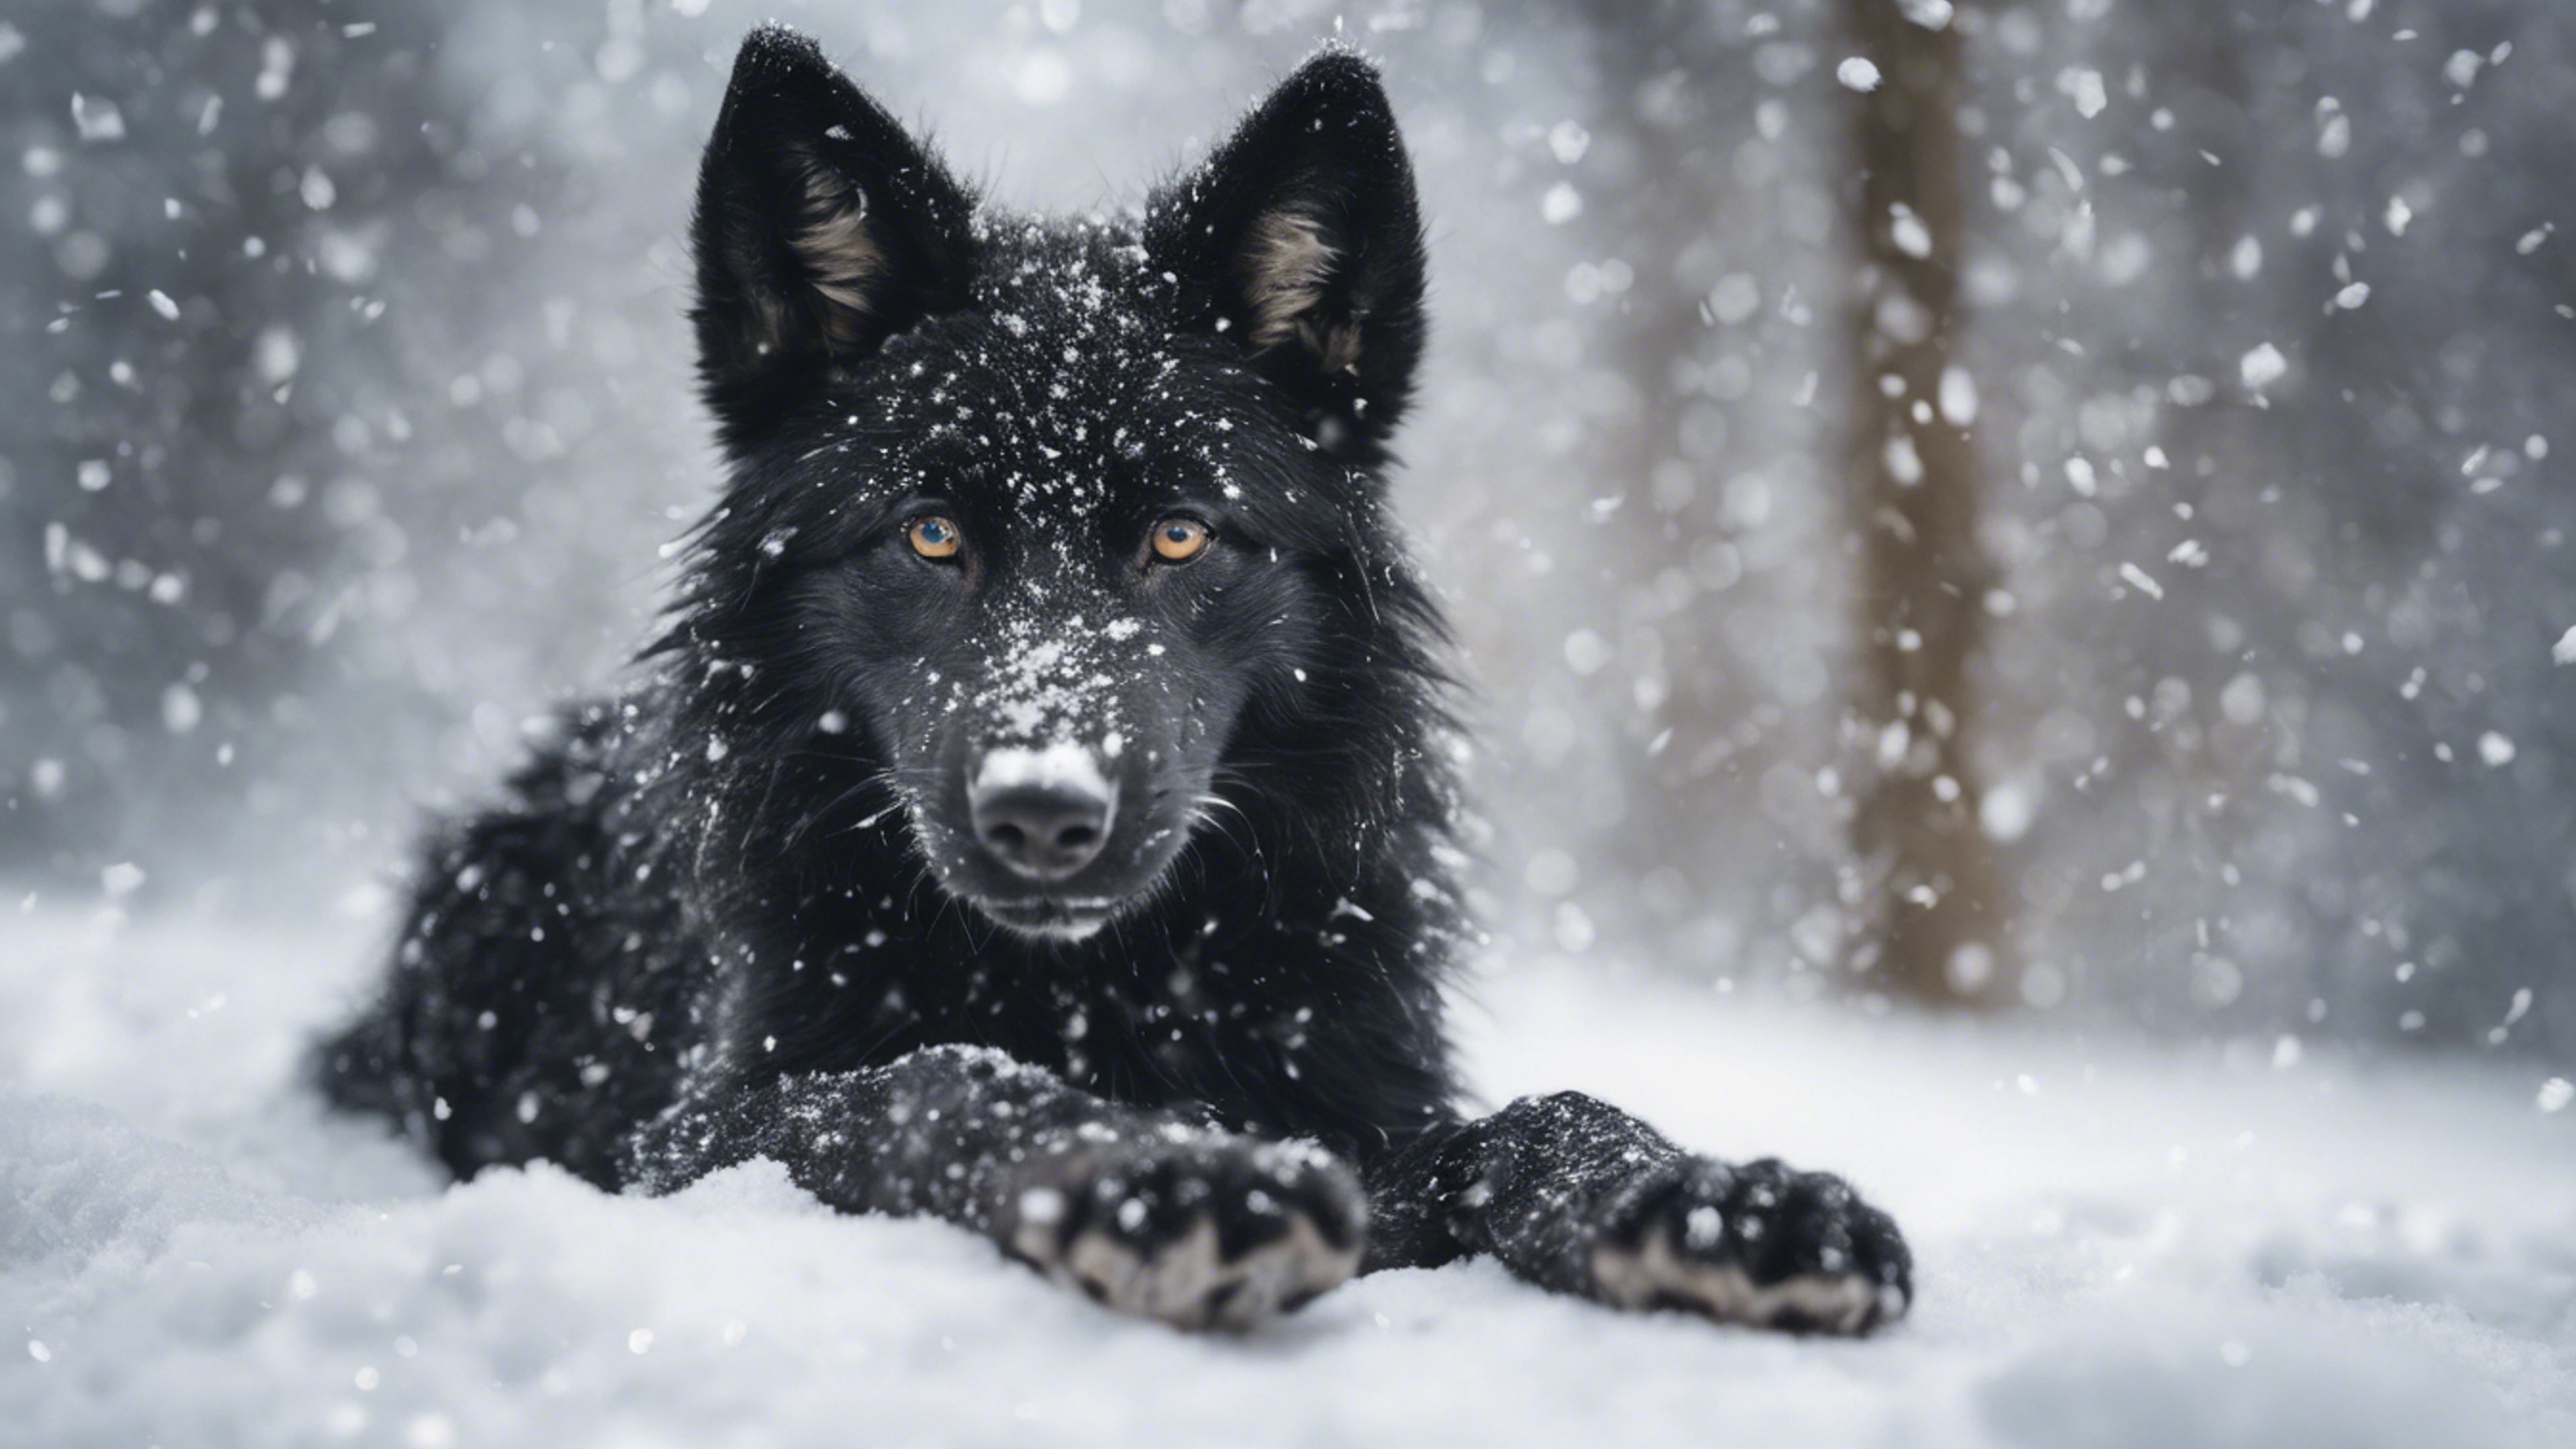 A playful black wolf puppy making the first snow angel of its life.壁紙[6a2907d16c81420c9dae]